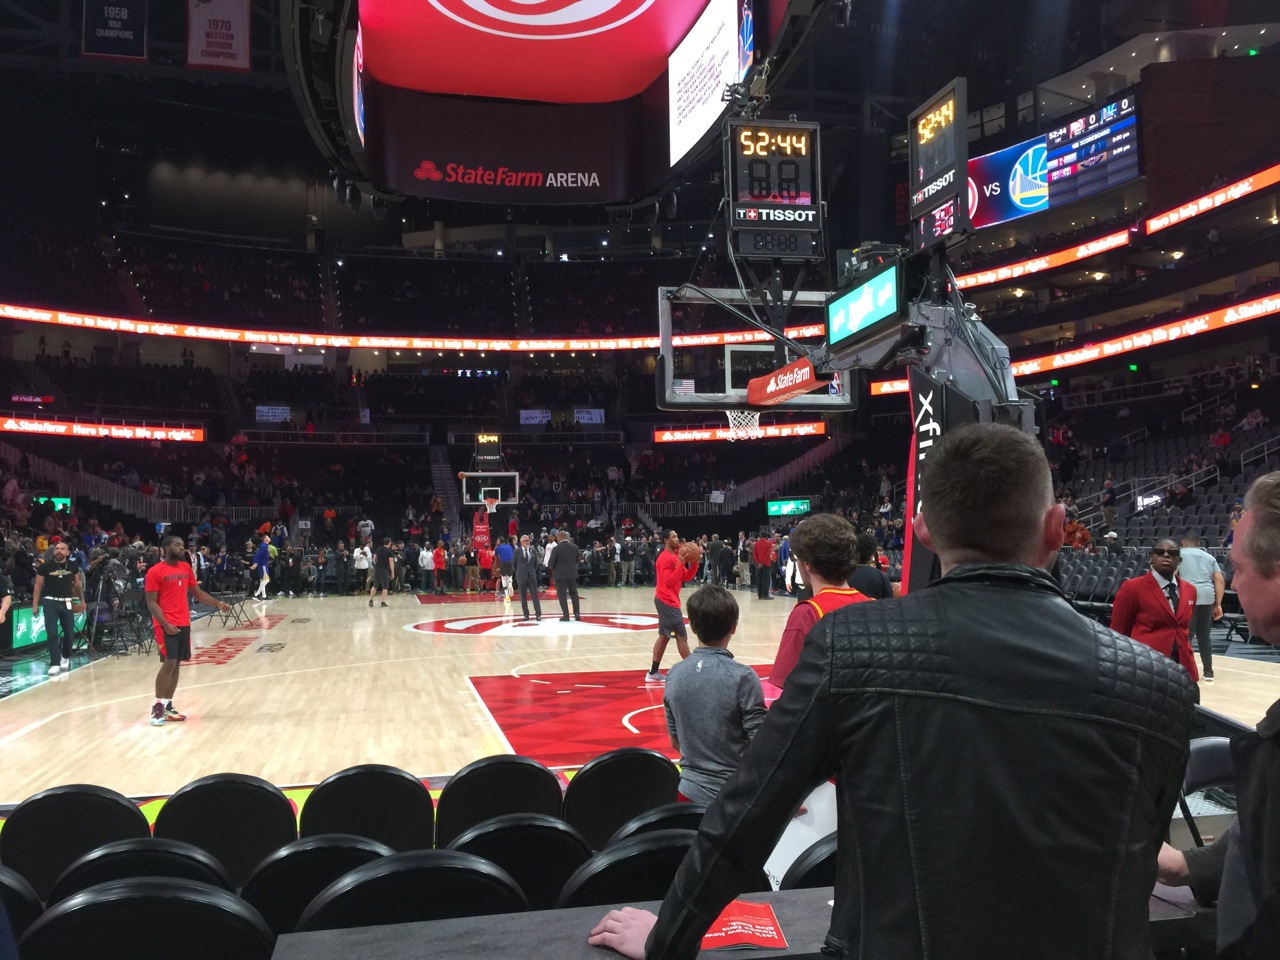 Some premium spaces sold out at remade Philips Arena, Hawks say